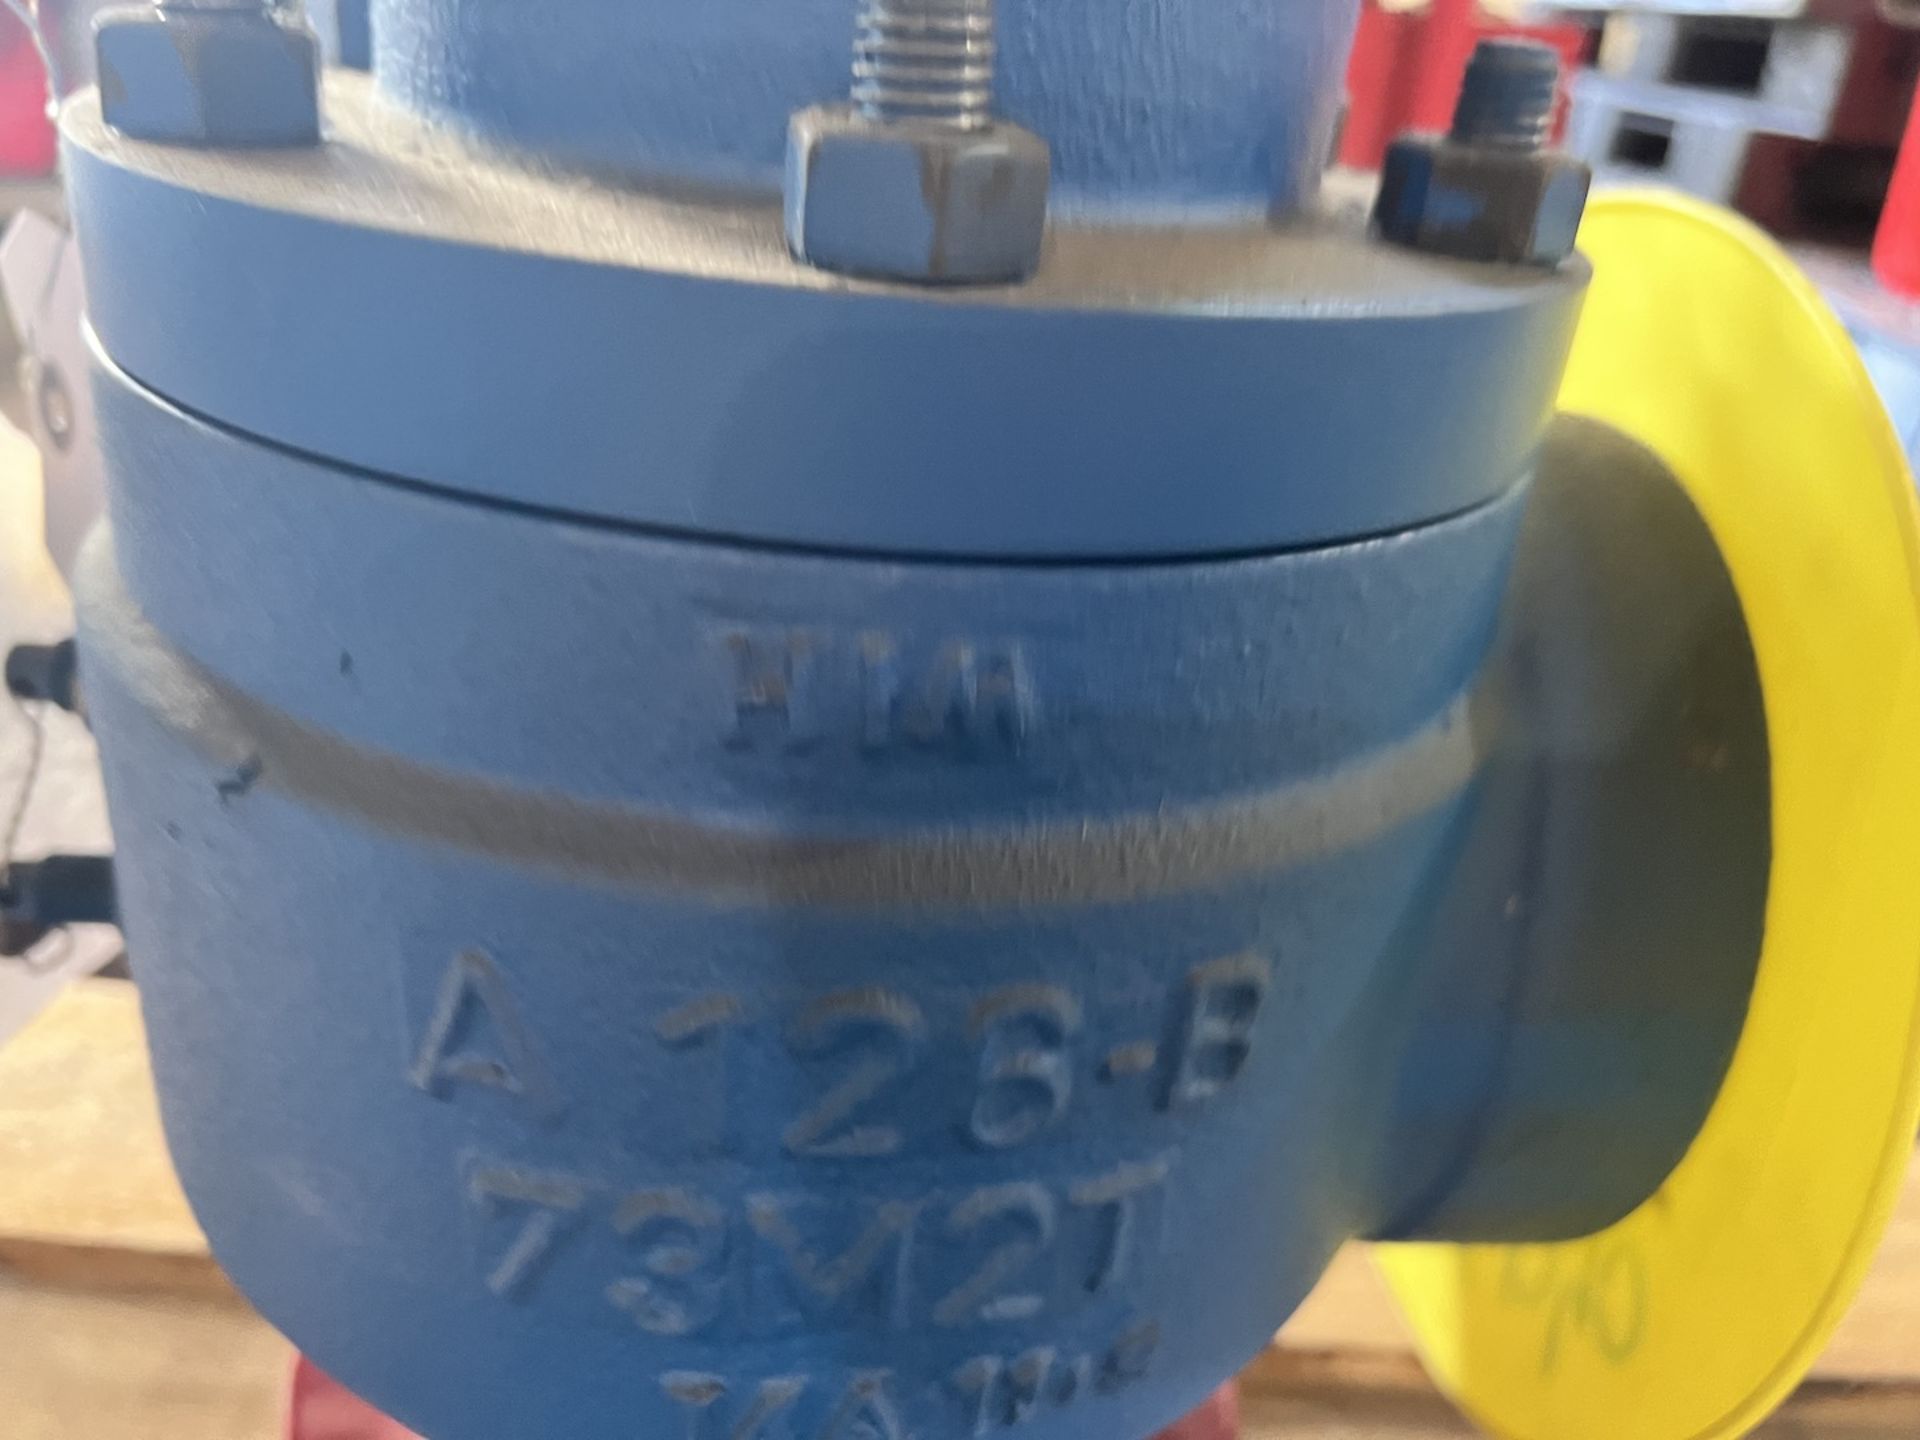 NEW SPIRAX SARCO SAFETY RELIEF VALVE, MODEL SV73, S/N 254169 - Image 3 of 9